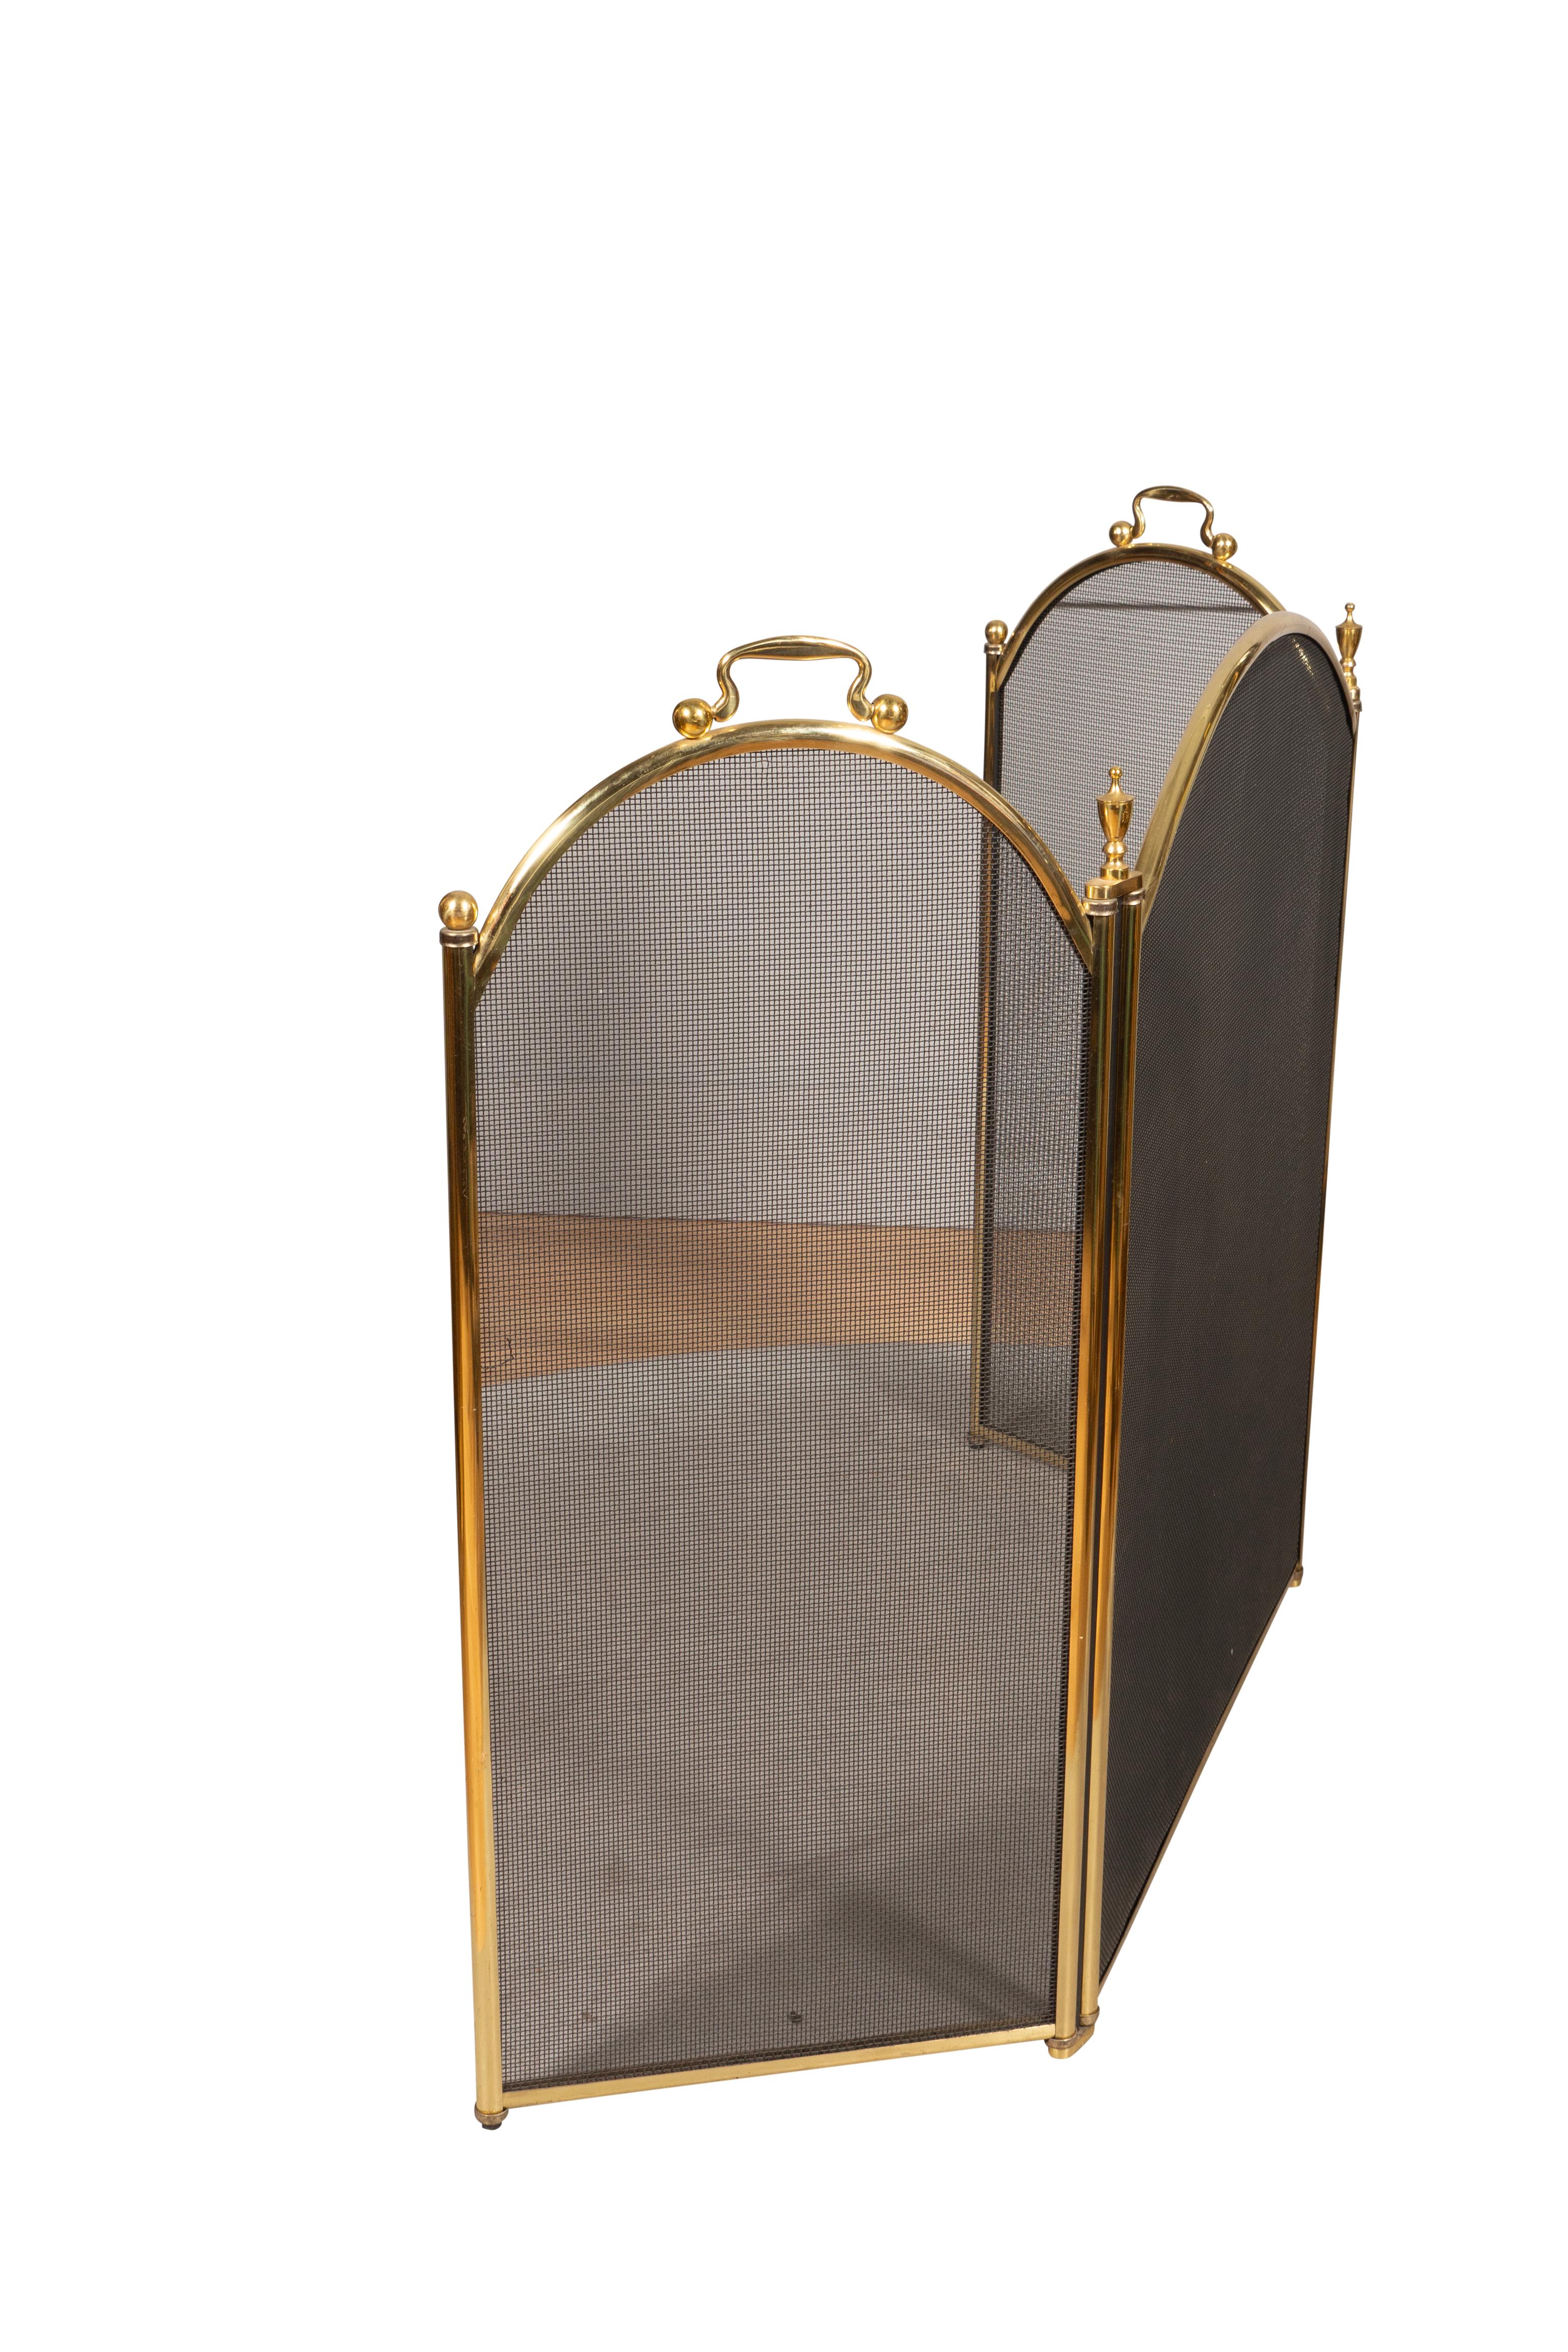 Central arched screen panel flanked by a pair of hinged panels. Urn finials and handles.